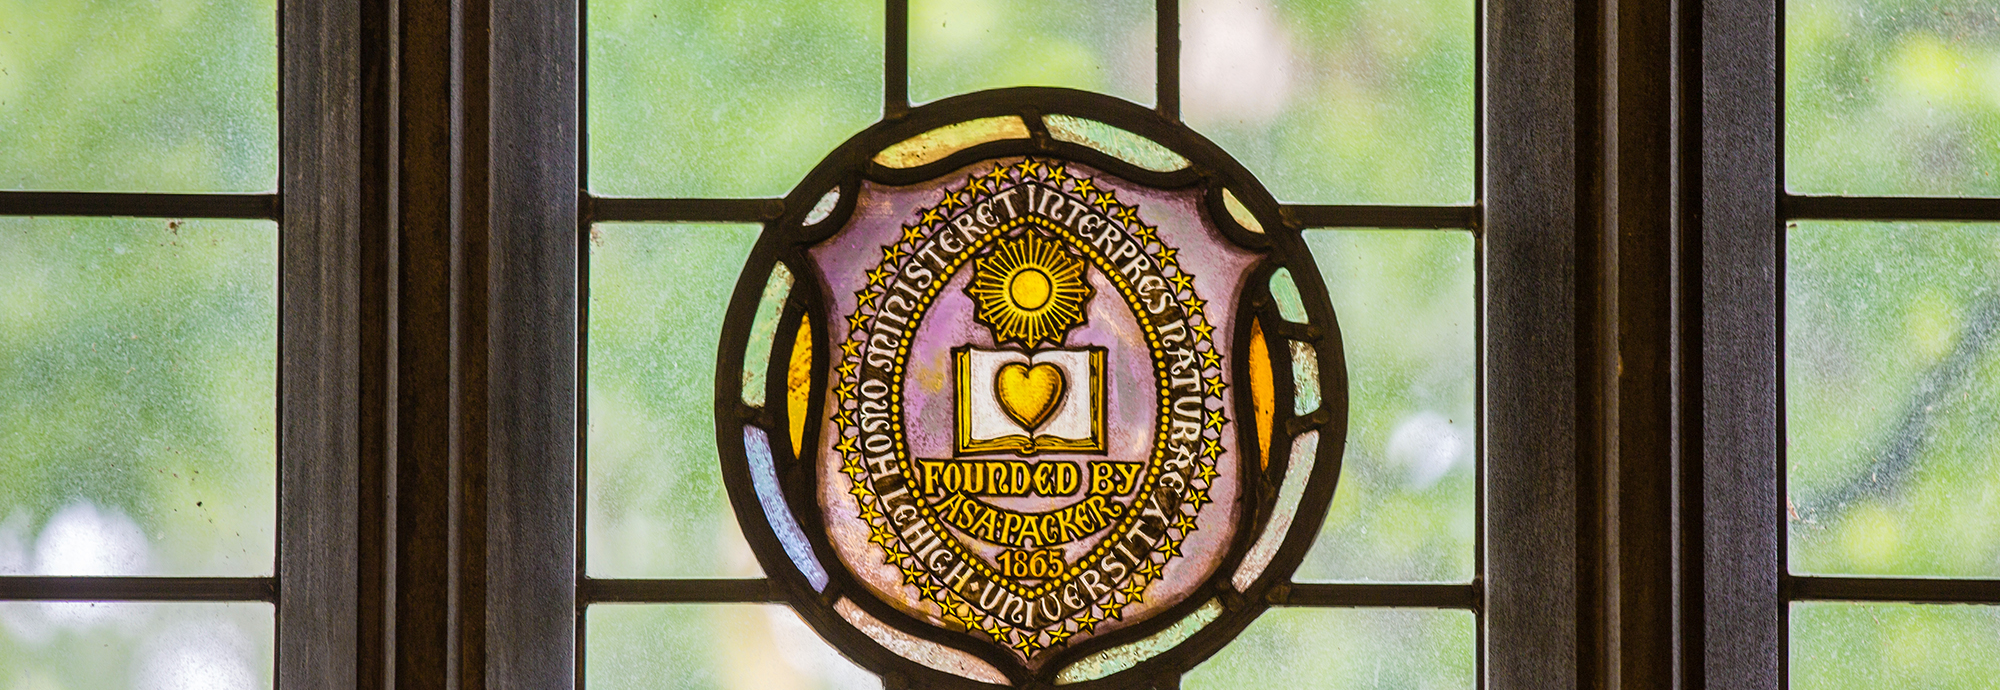 Stained Glass window detail with Lehigh Seal